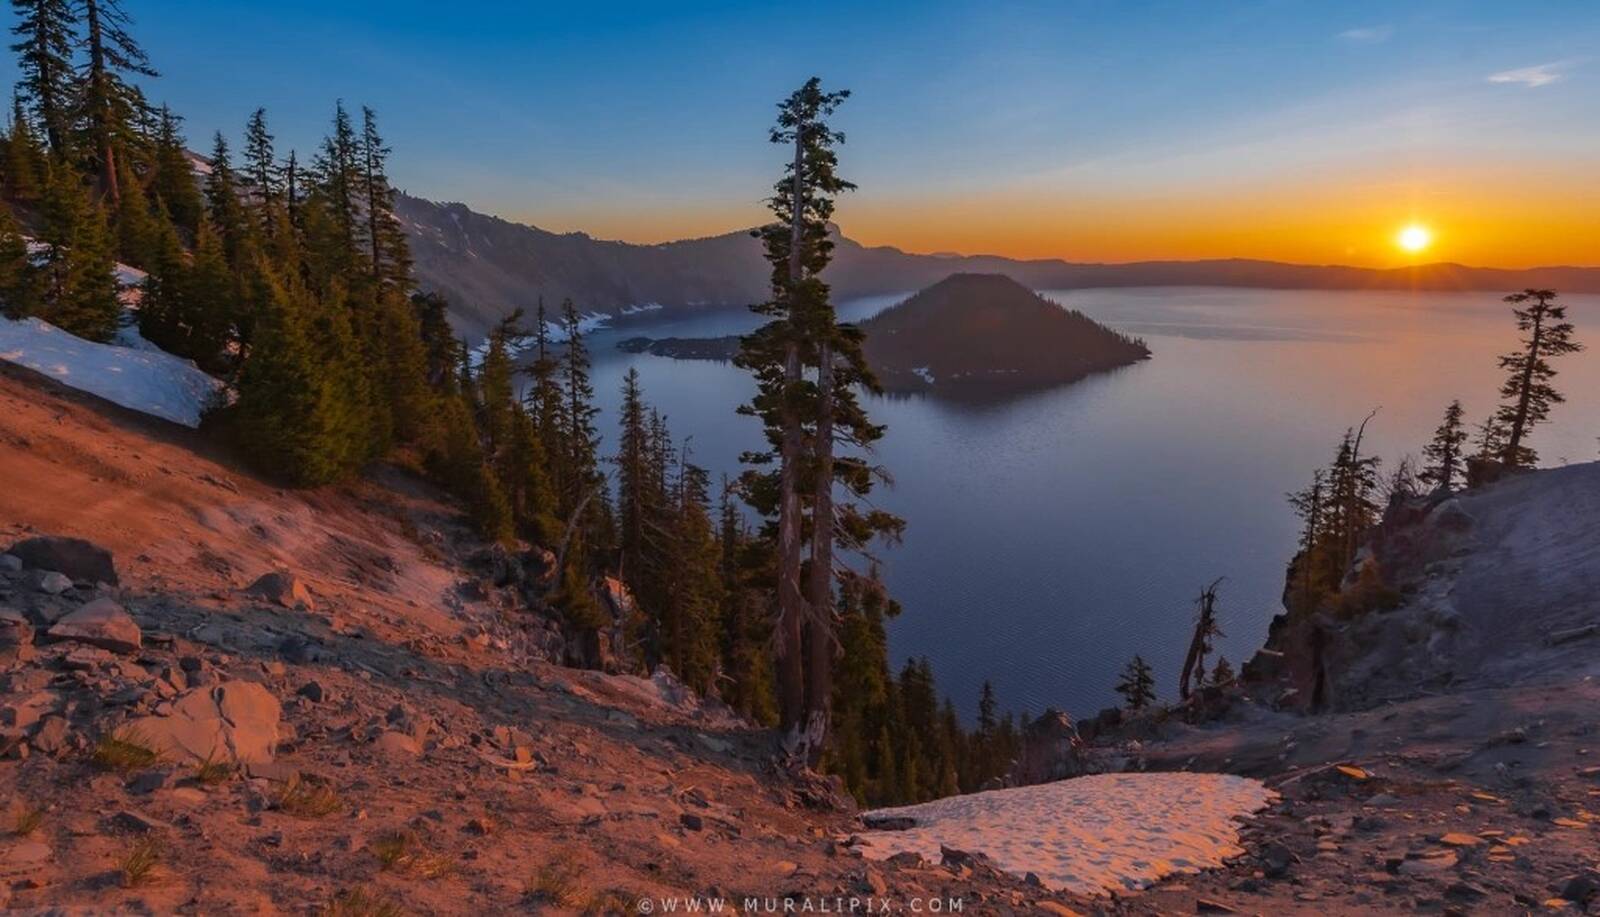 Image of Crater Lake - Discovery Point Trail by Murali Narayanan